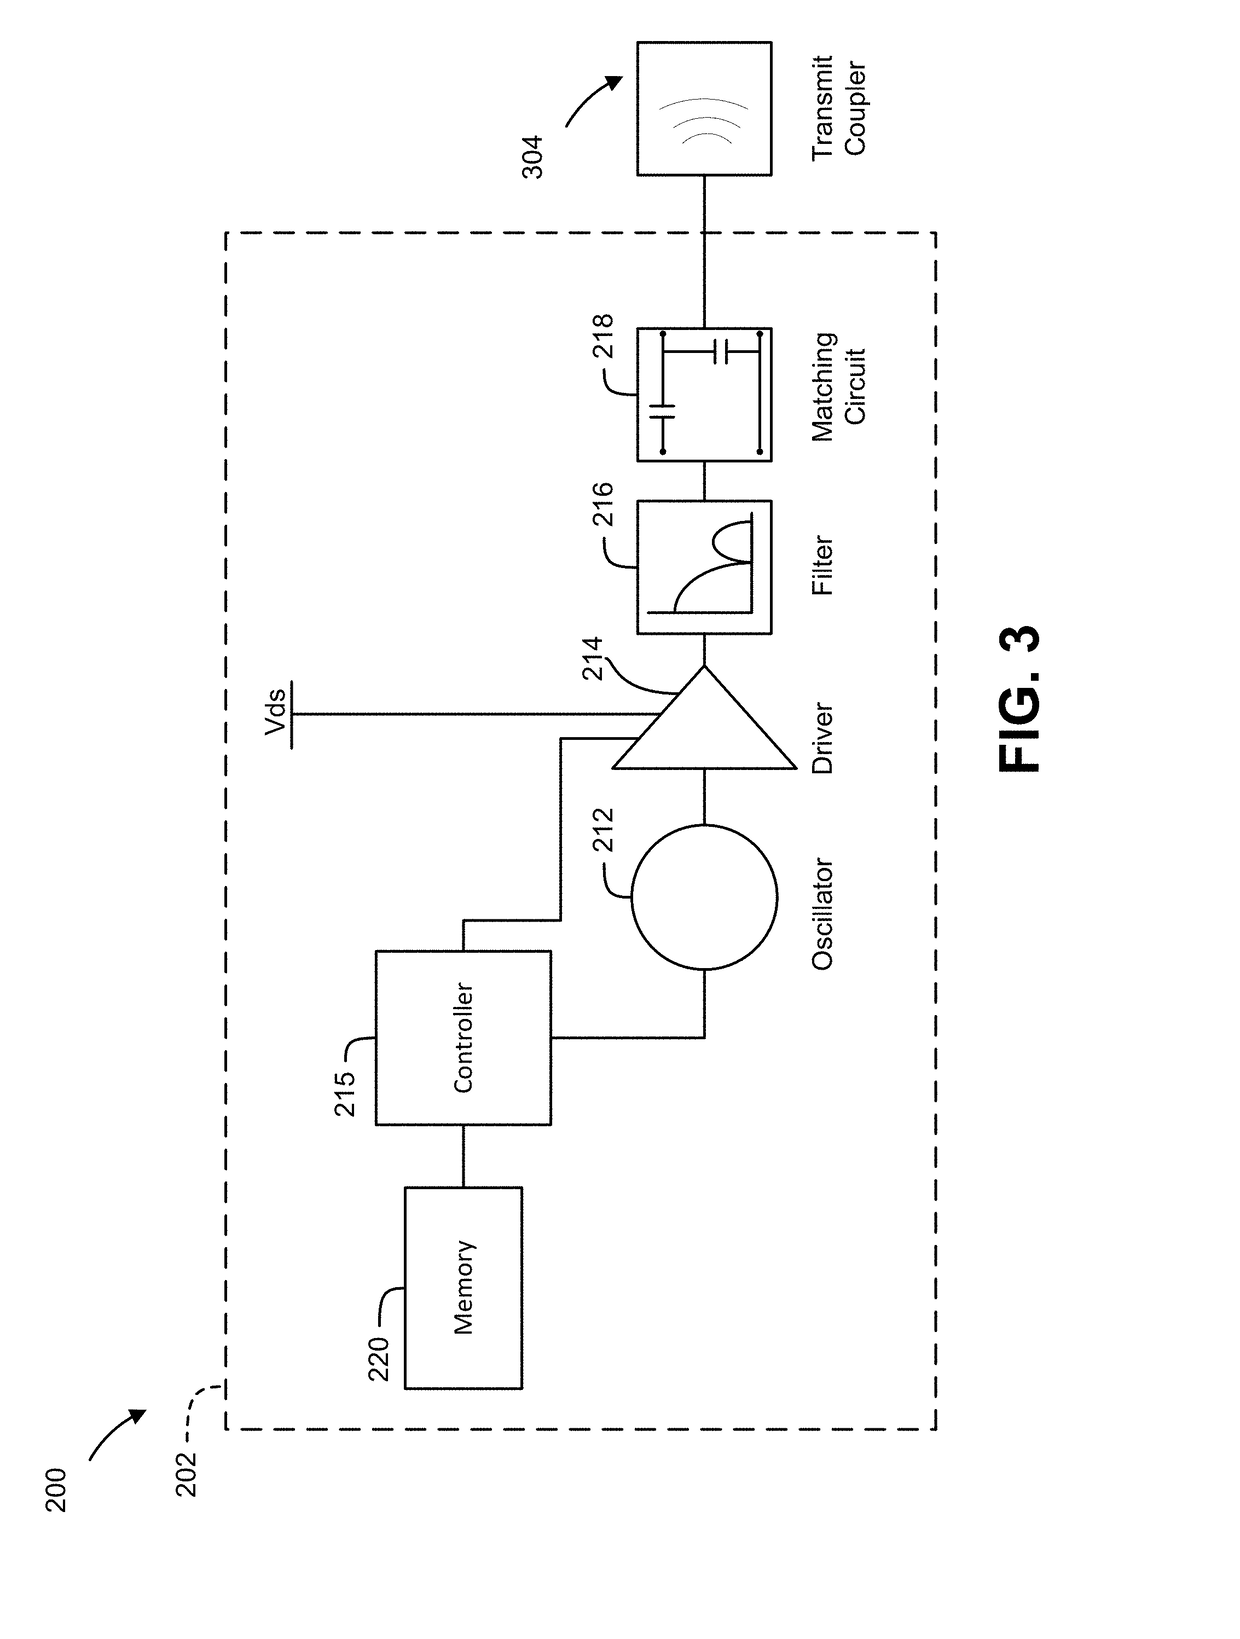 Multi-impedance rectification for wireless power transfer